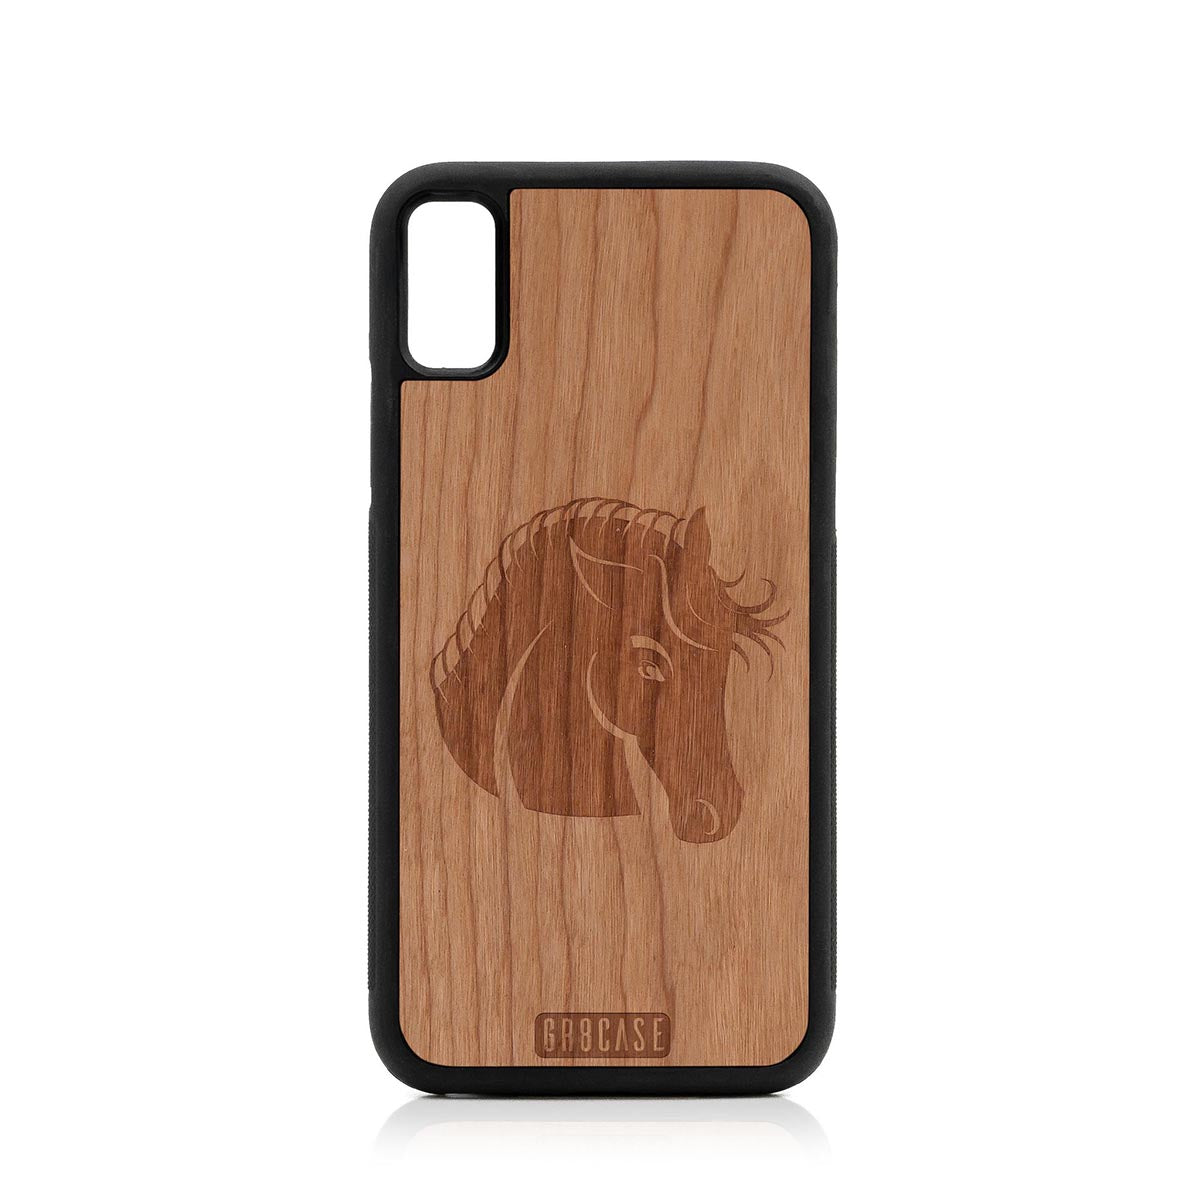 Horse Design Wood Case For iPhone XS Max by GR8CASE